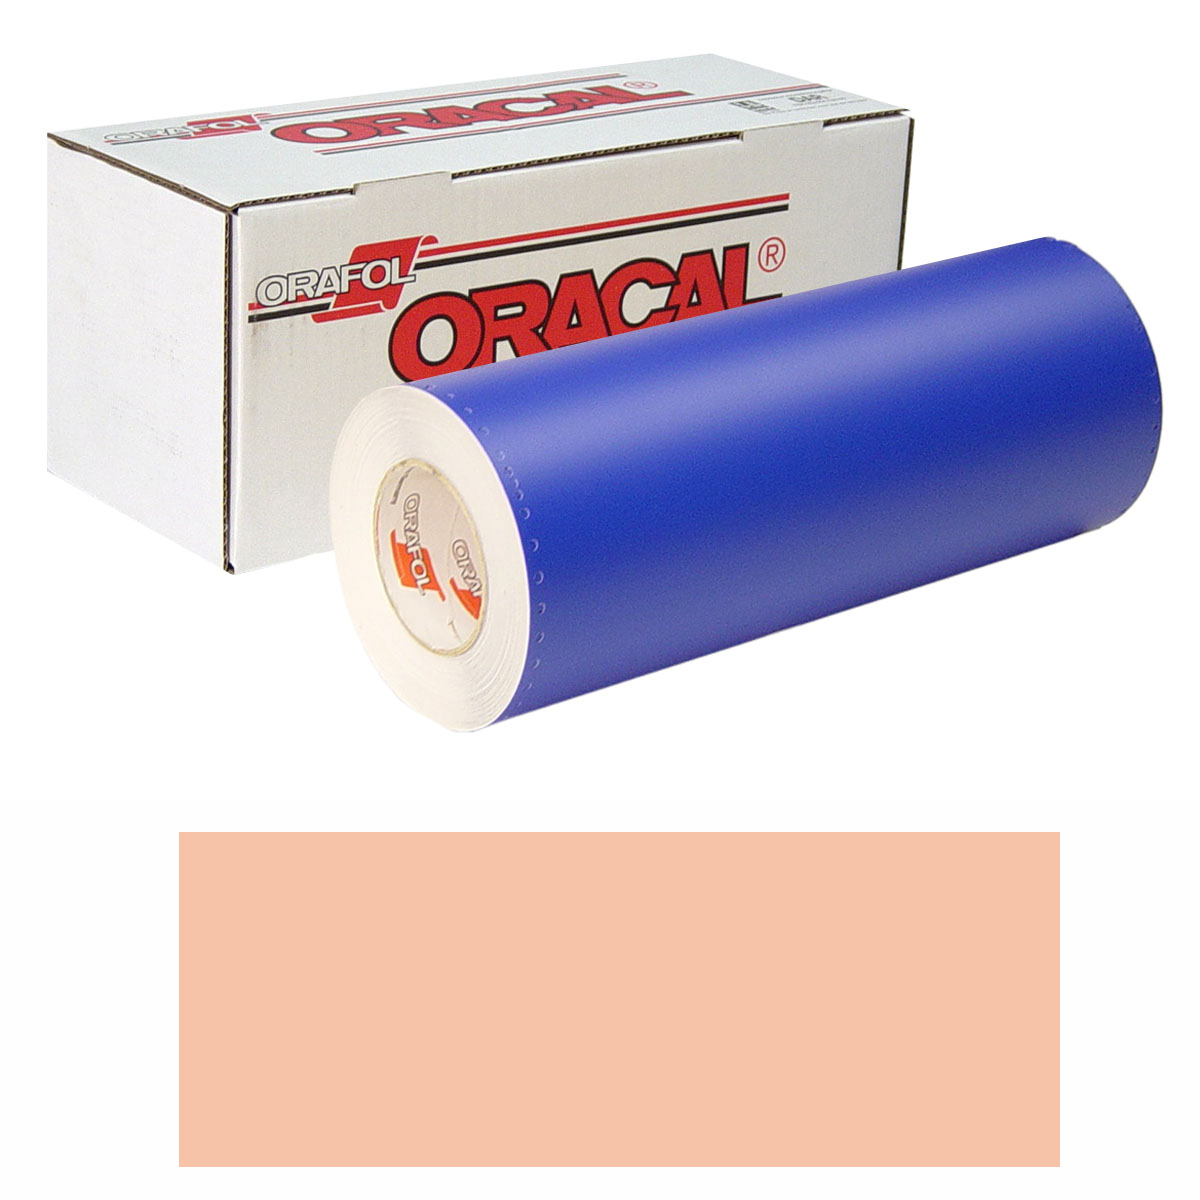 ORACAL 8300 15in X 10yd 089 Salmon Pink